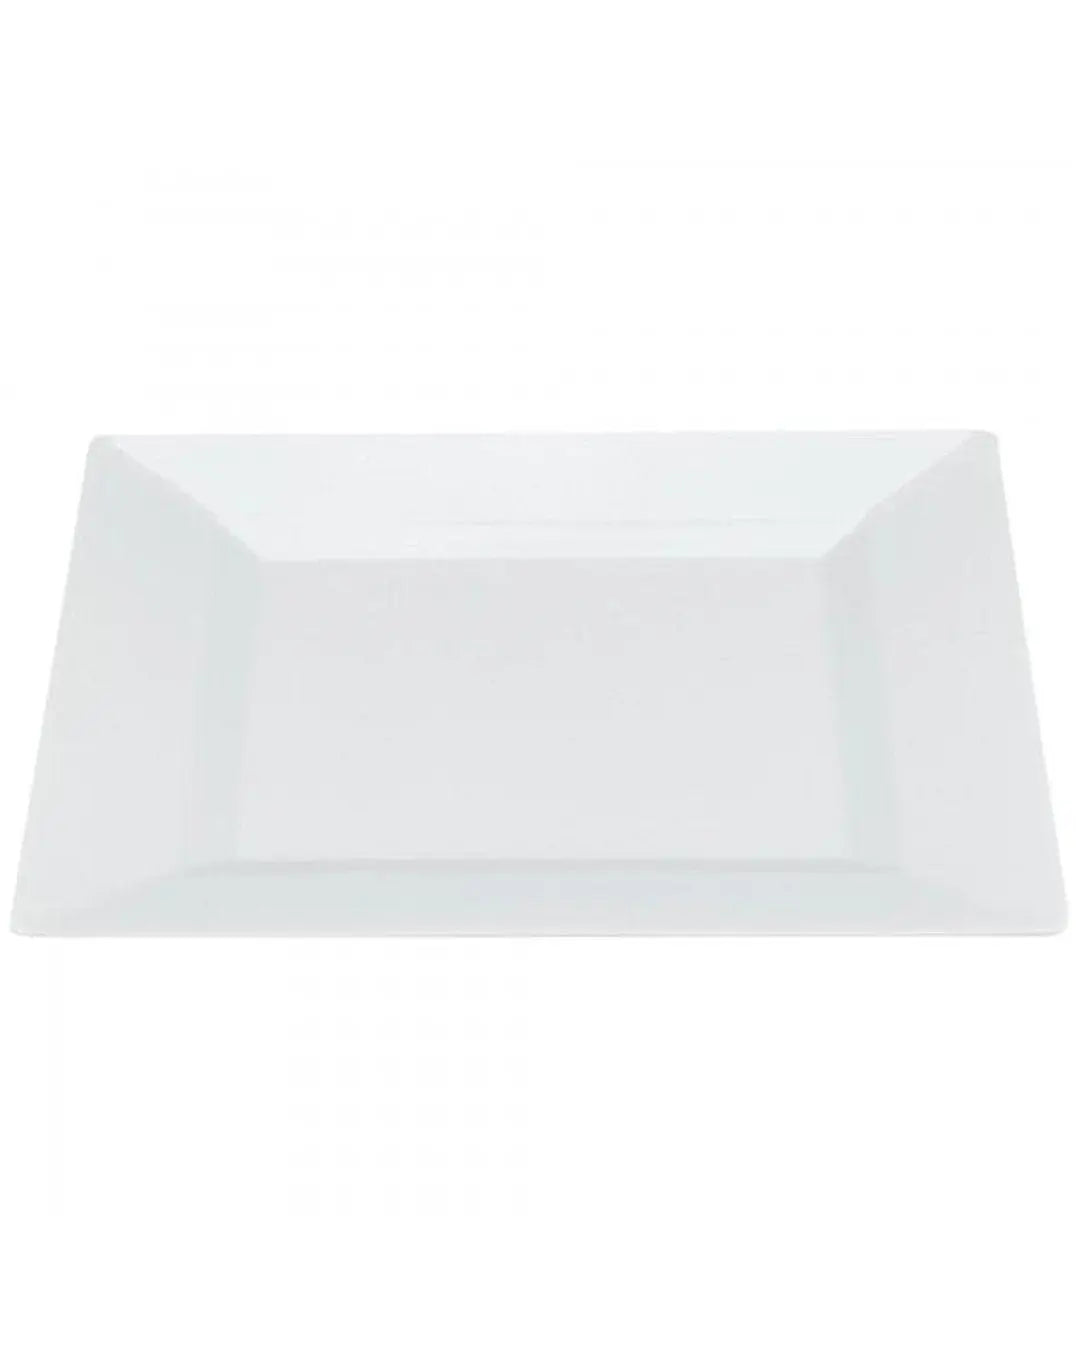 Square White Plastic Plates 23cm Pack Size 8 Partyware 5033298005650